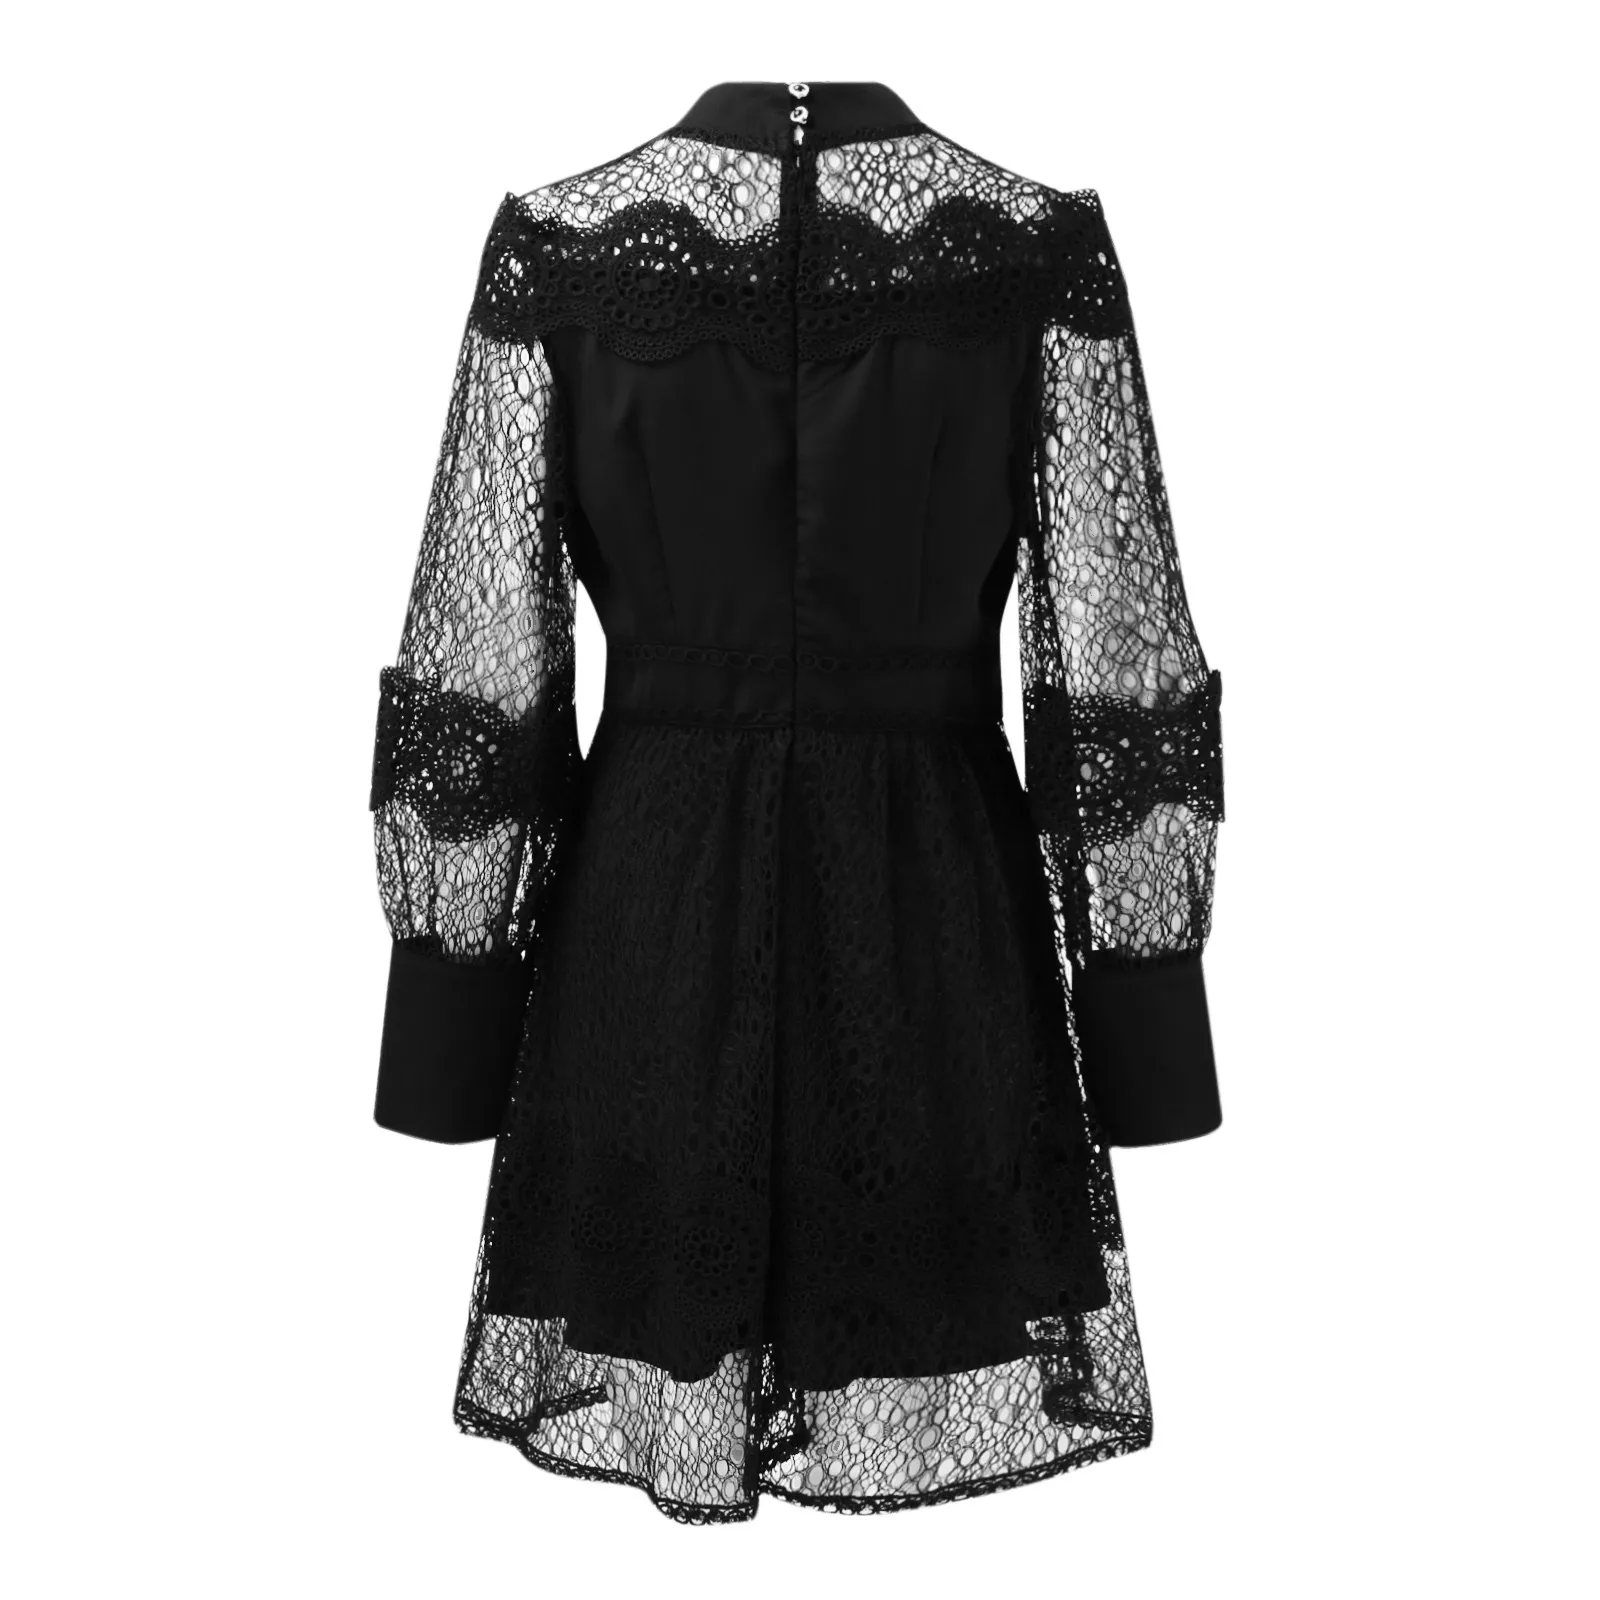 White Elegant Patchwork Embroidery Dress For Women Stand Collar Lantern Long Sleeve High Waist Dresses Female Lace Ruffled Dress